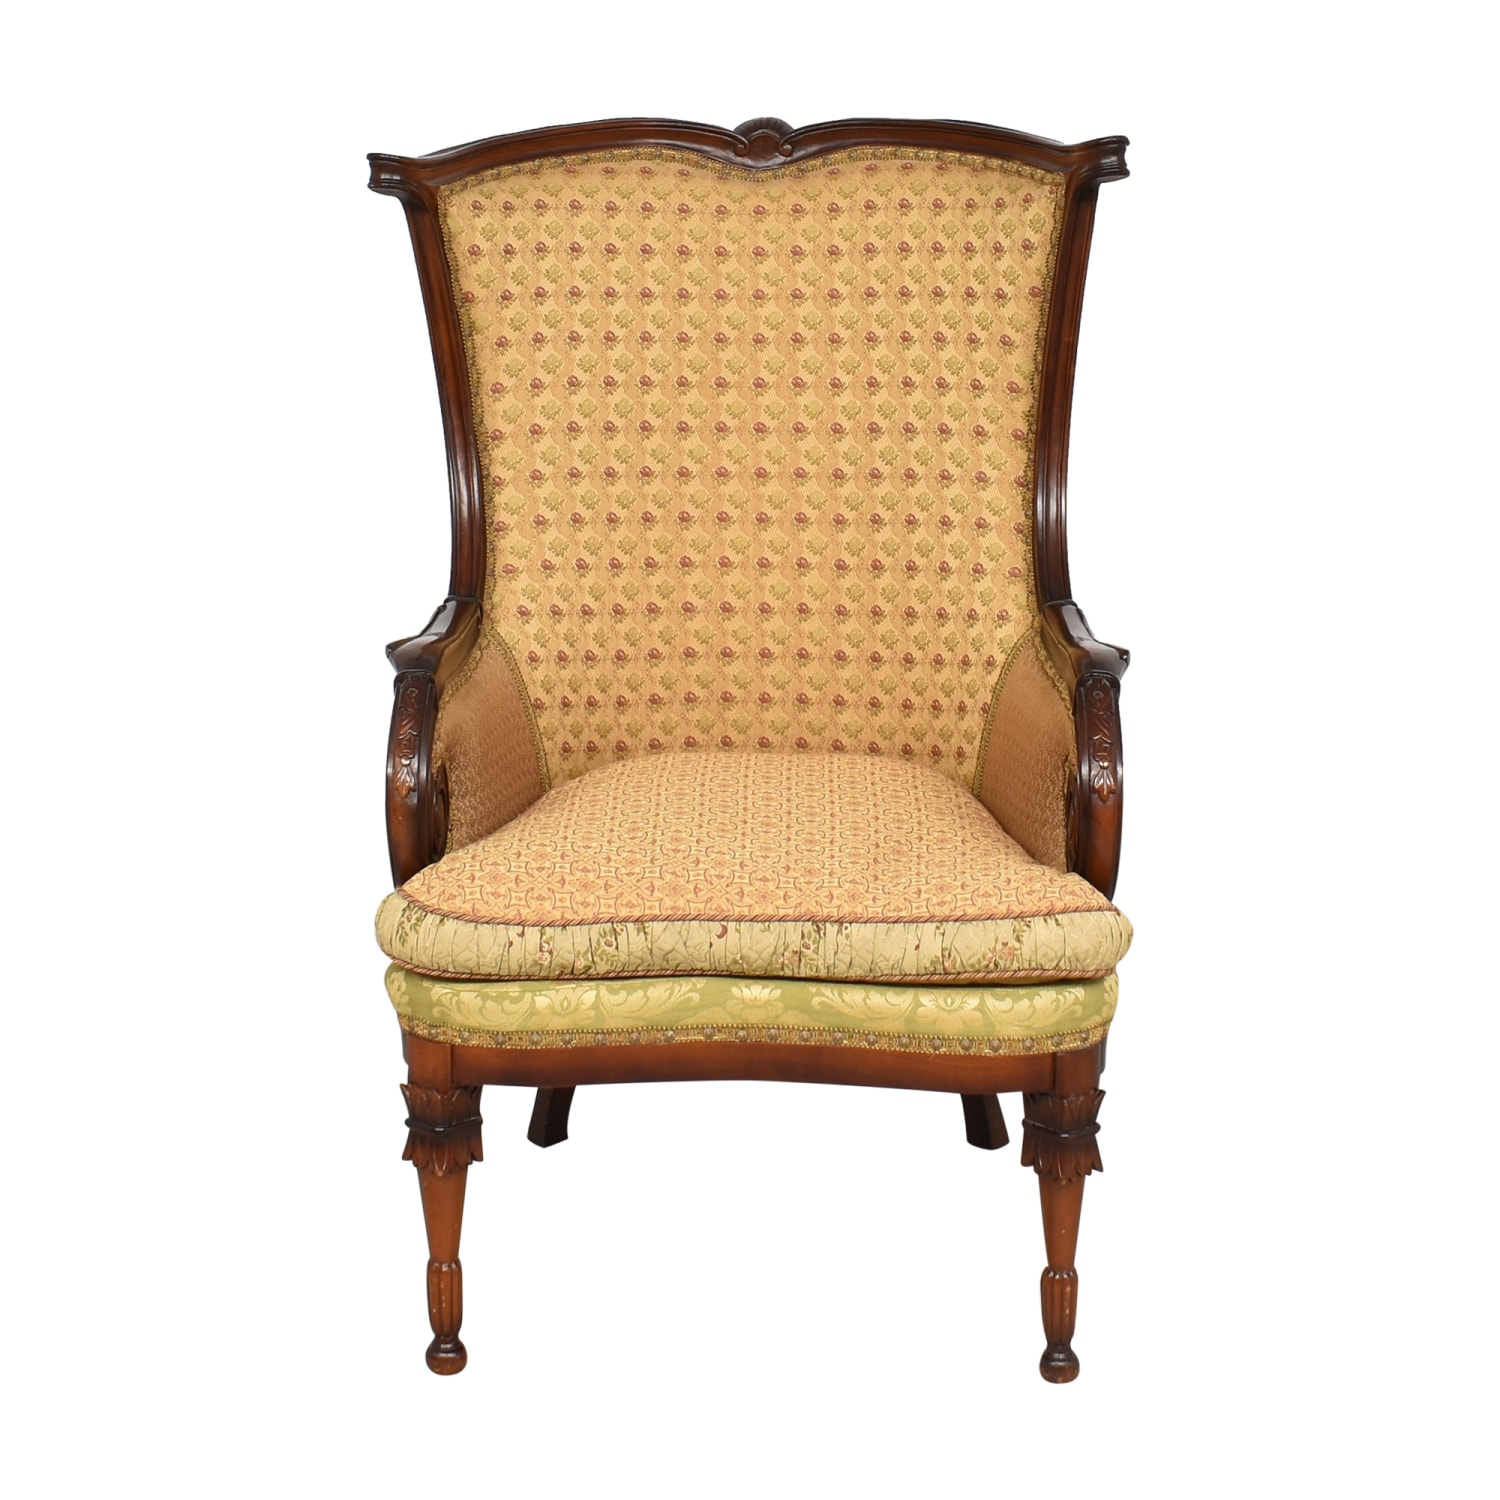 Antique French Louis XV style wingback chair.